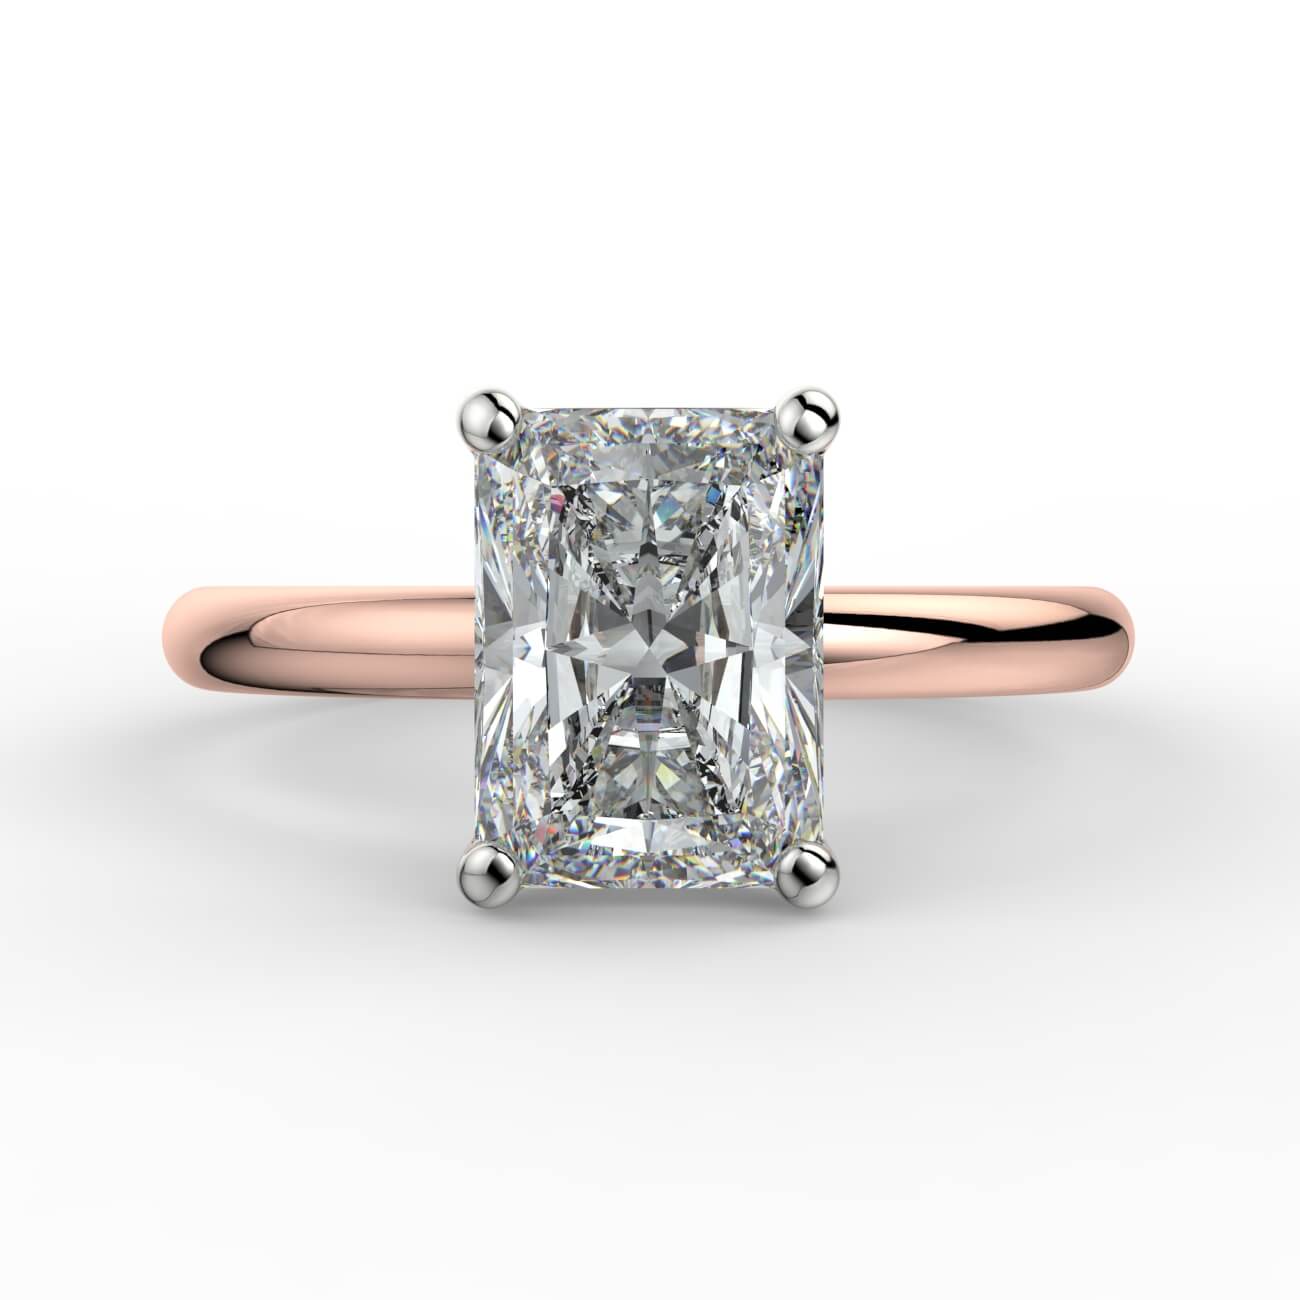 Solitaire radiant cut diamond engagement ring in white and rose gold – Australian Diamond Network